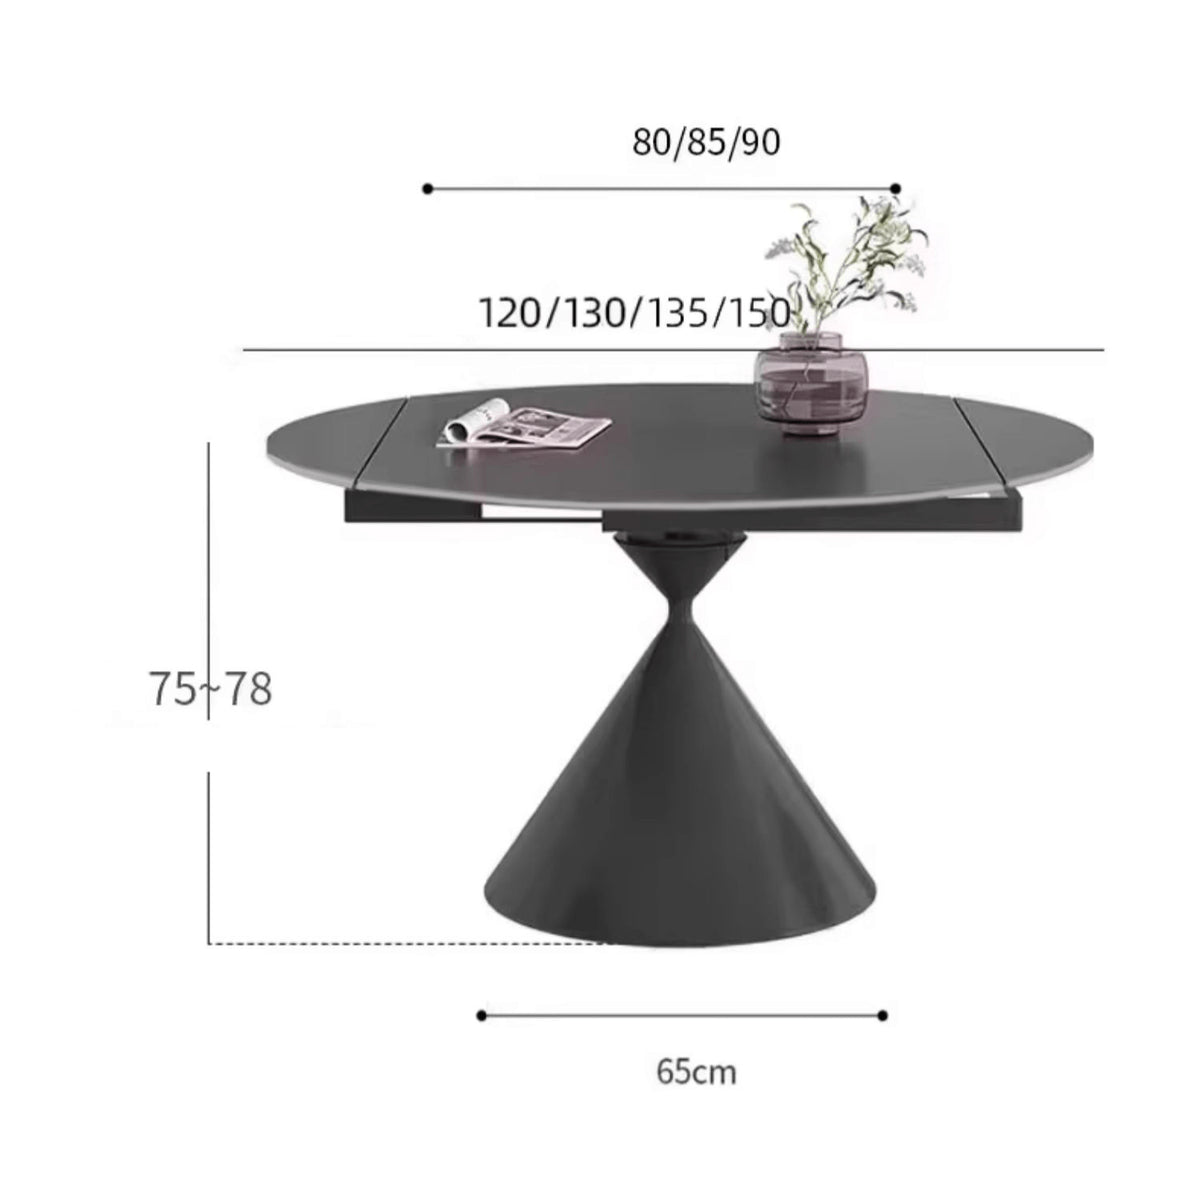 Elegant White & Black Sintered Stone Table for Modern Dining Spaces yw-170